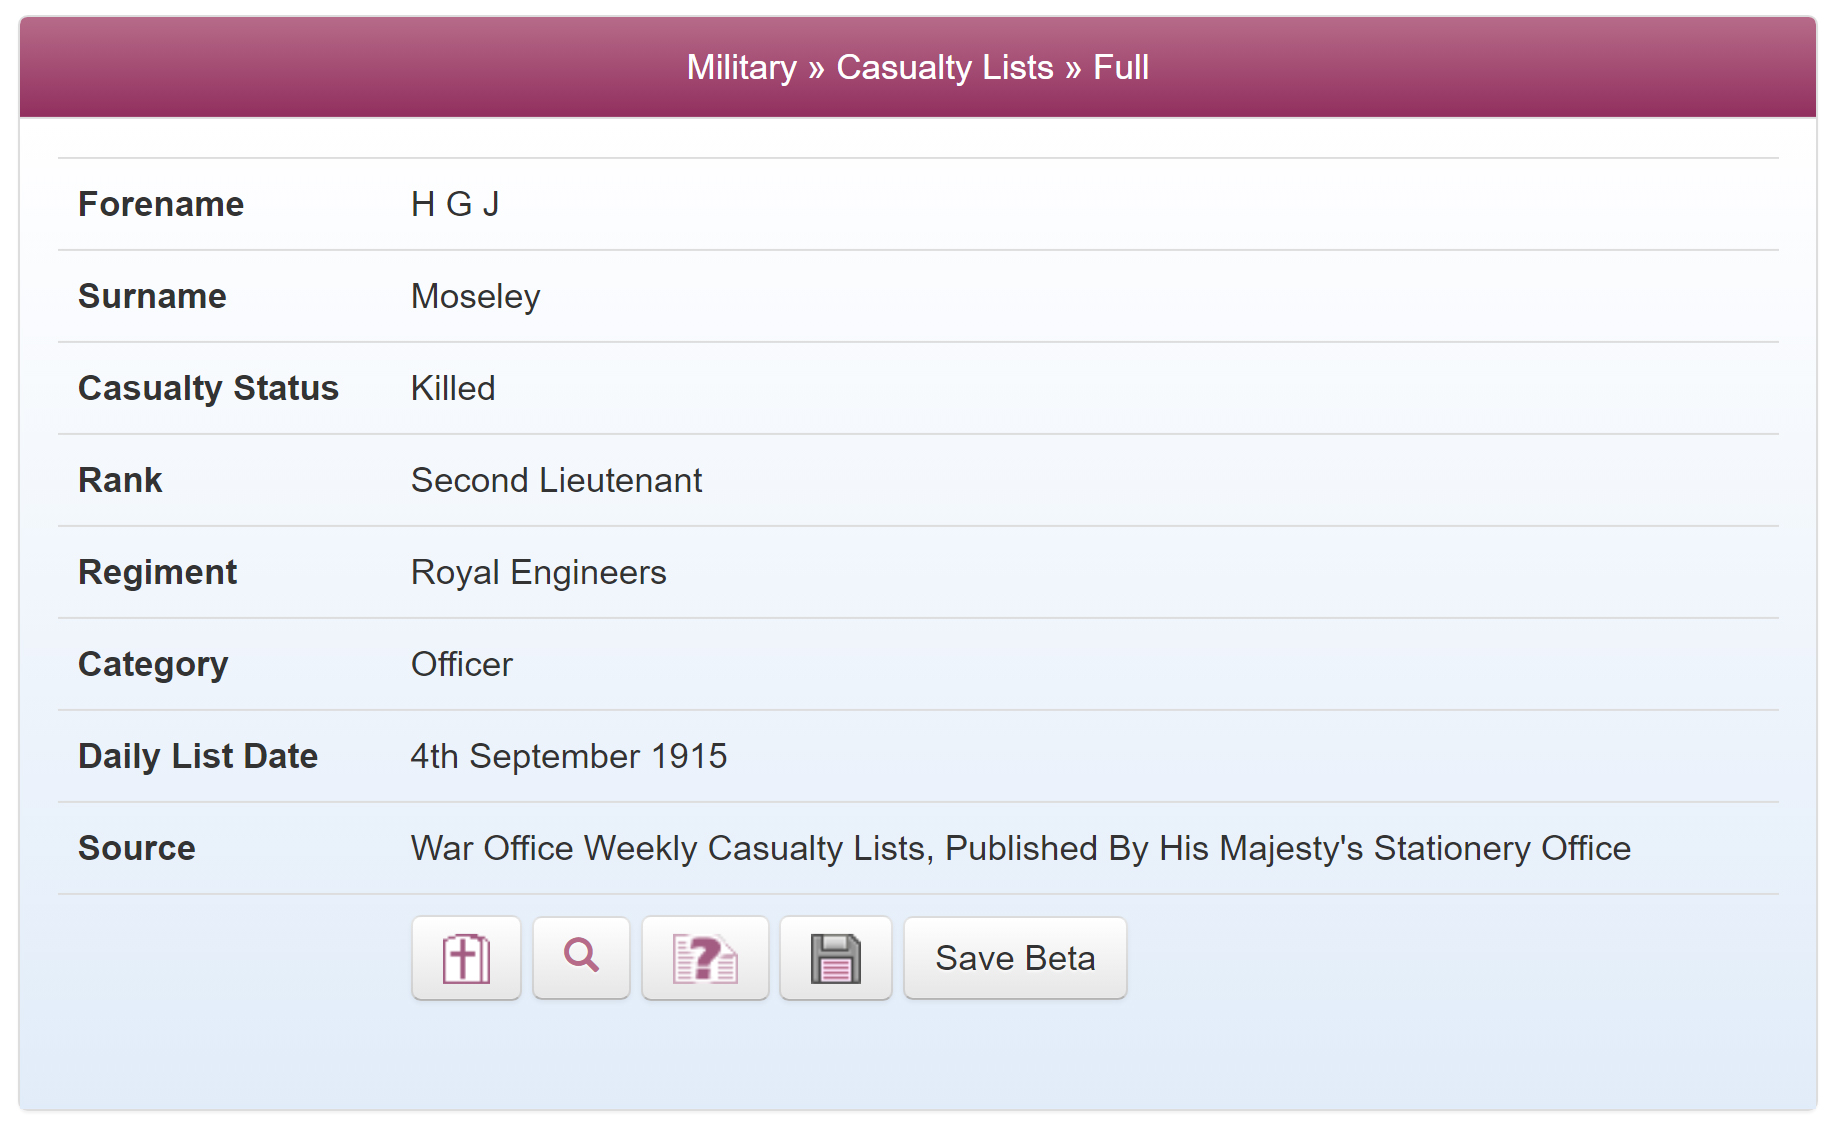 Henry G J Moseley's record in the Casualty Lists